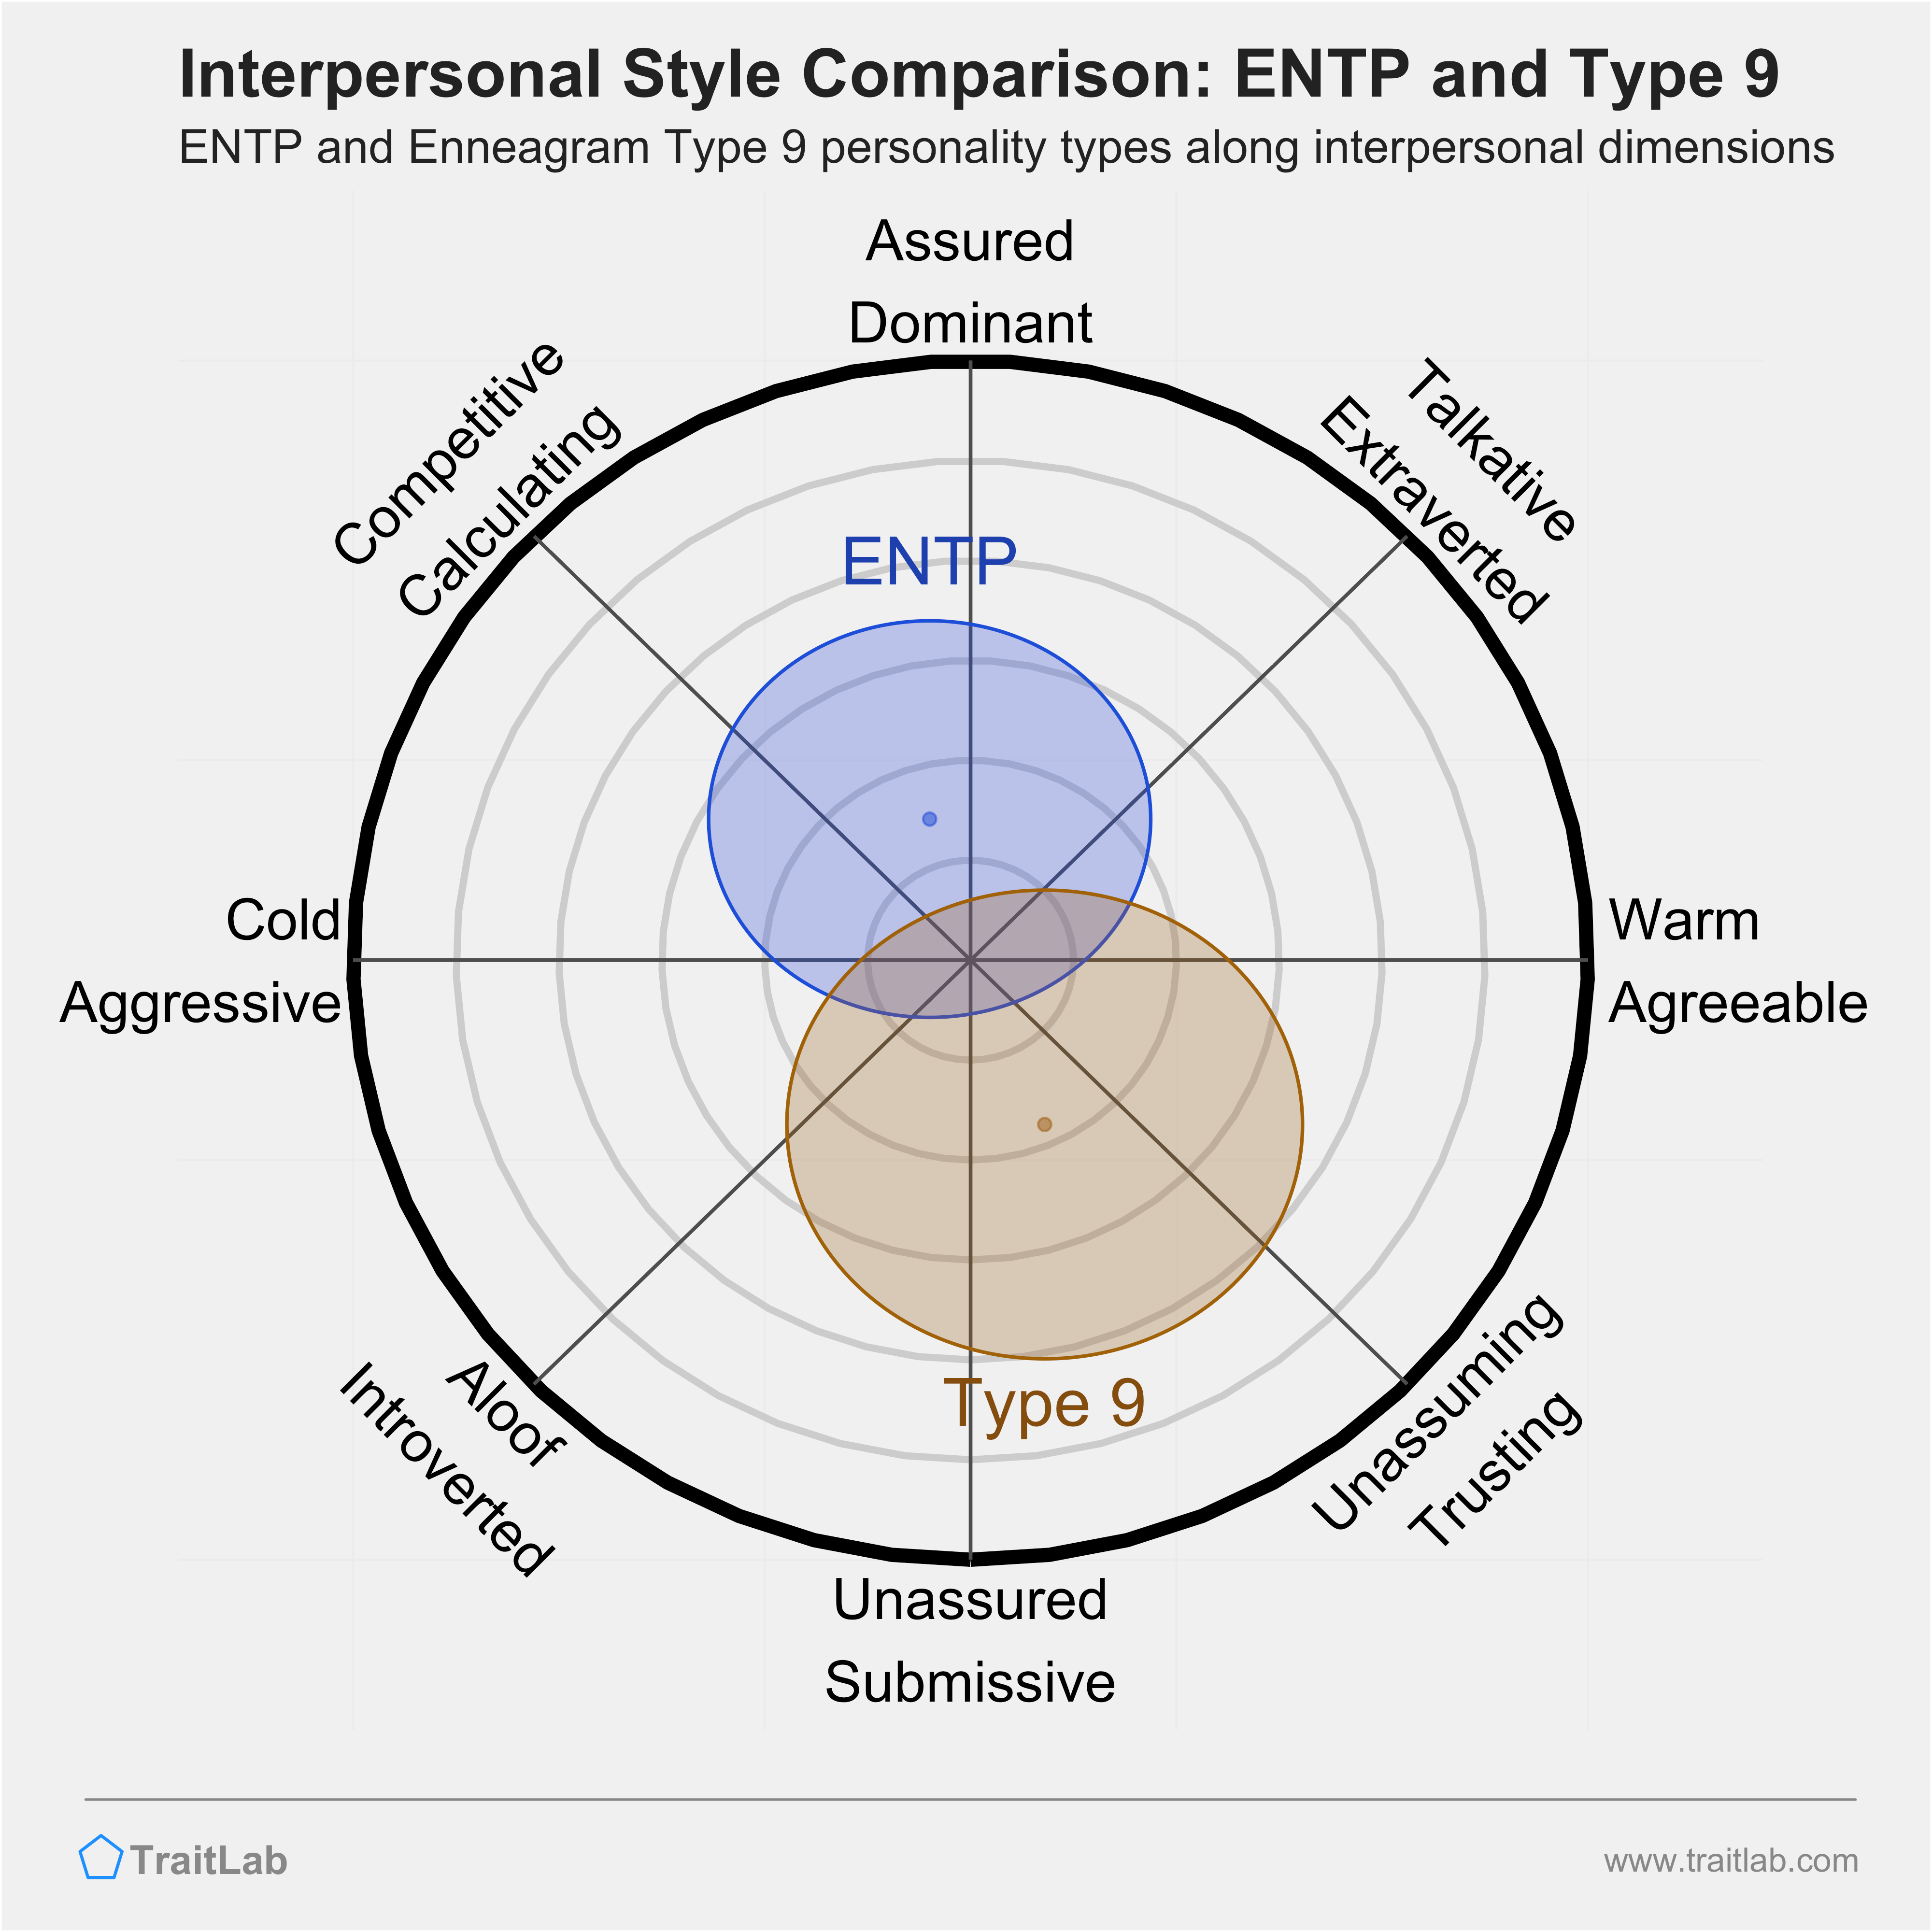 Enneagram ENTP and Type 9 comparison across interpersonal dimensions